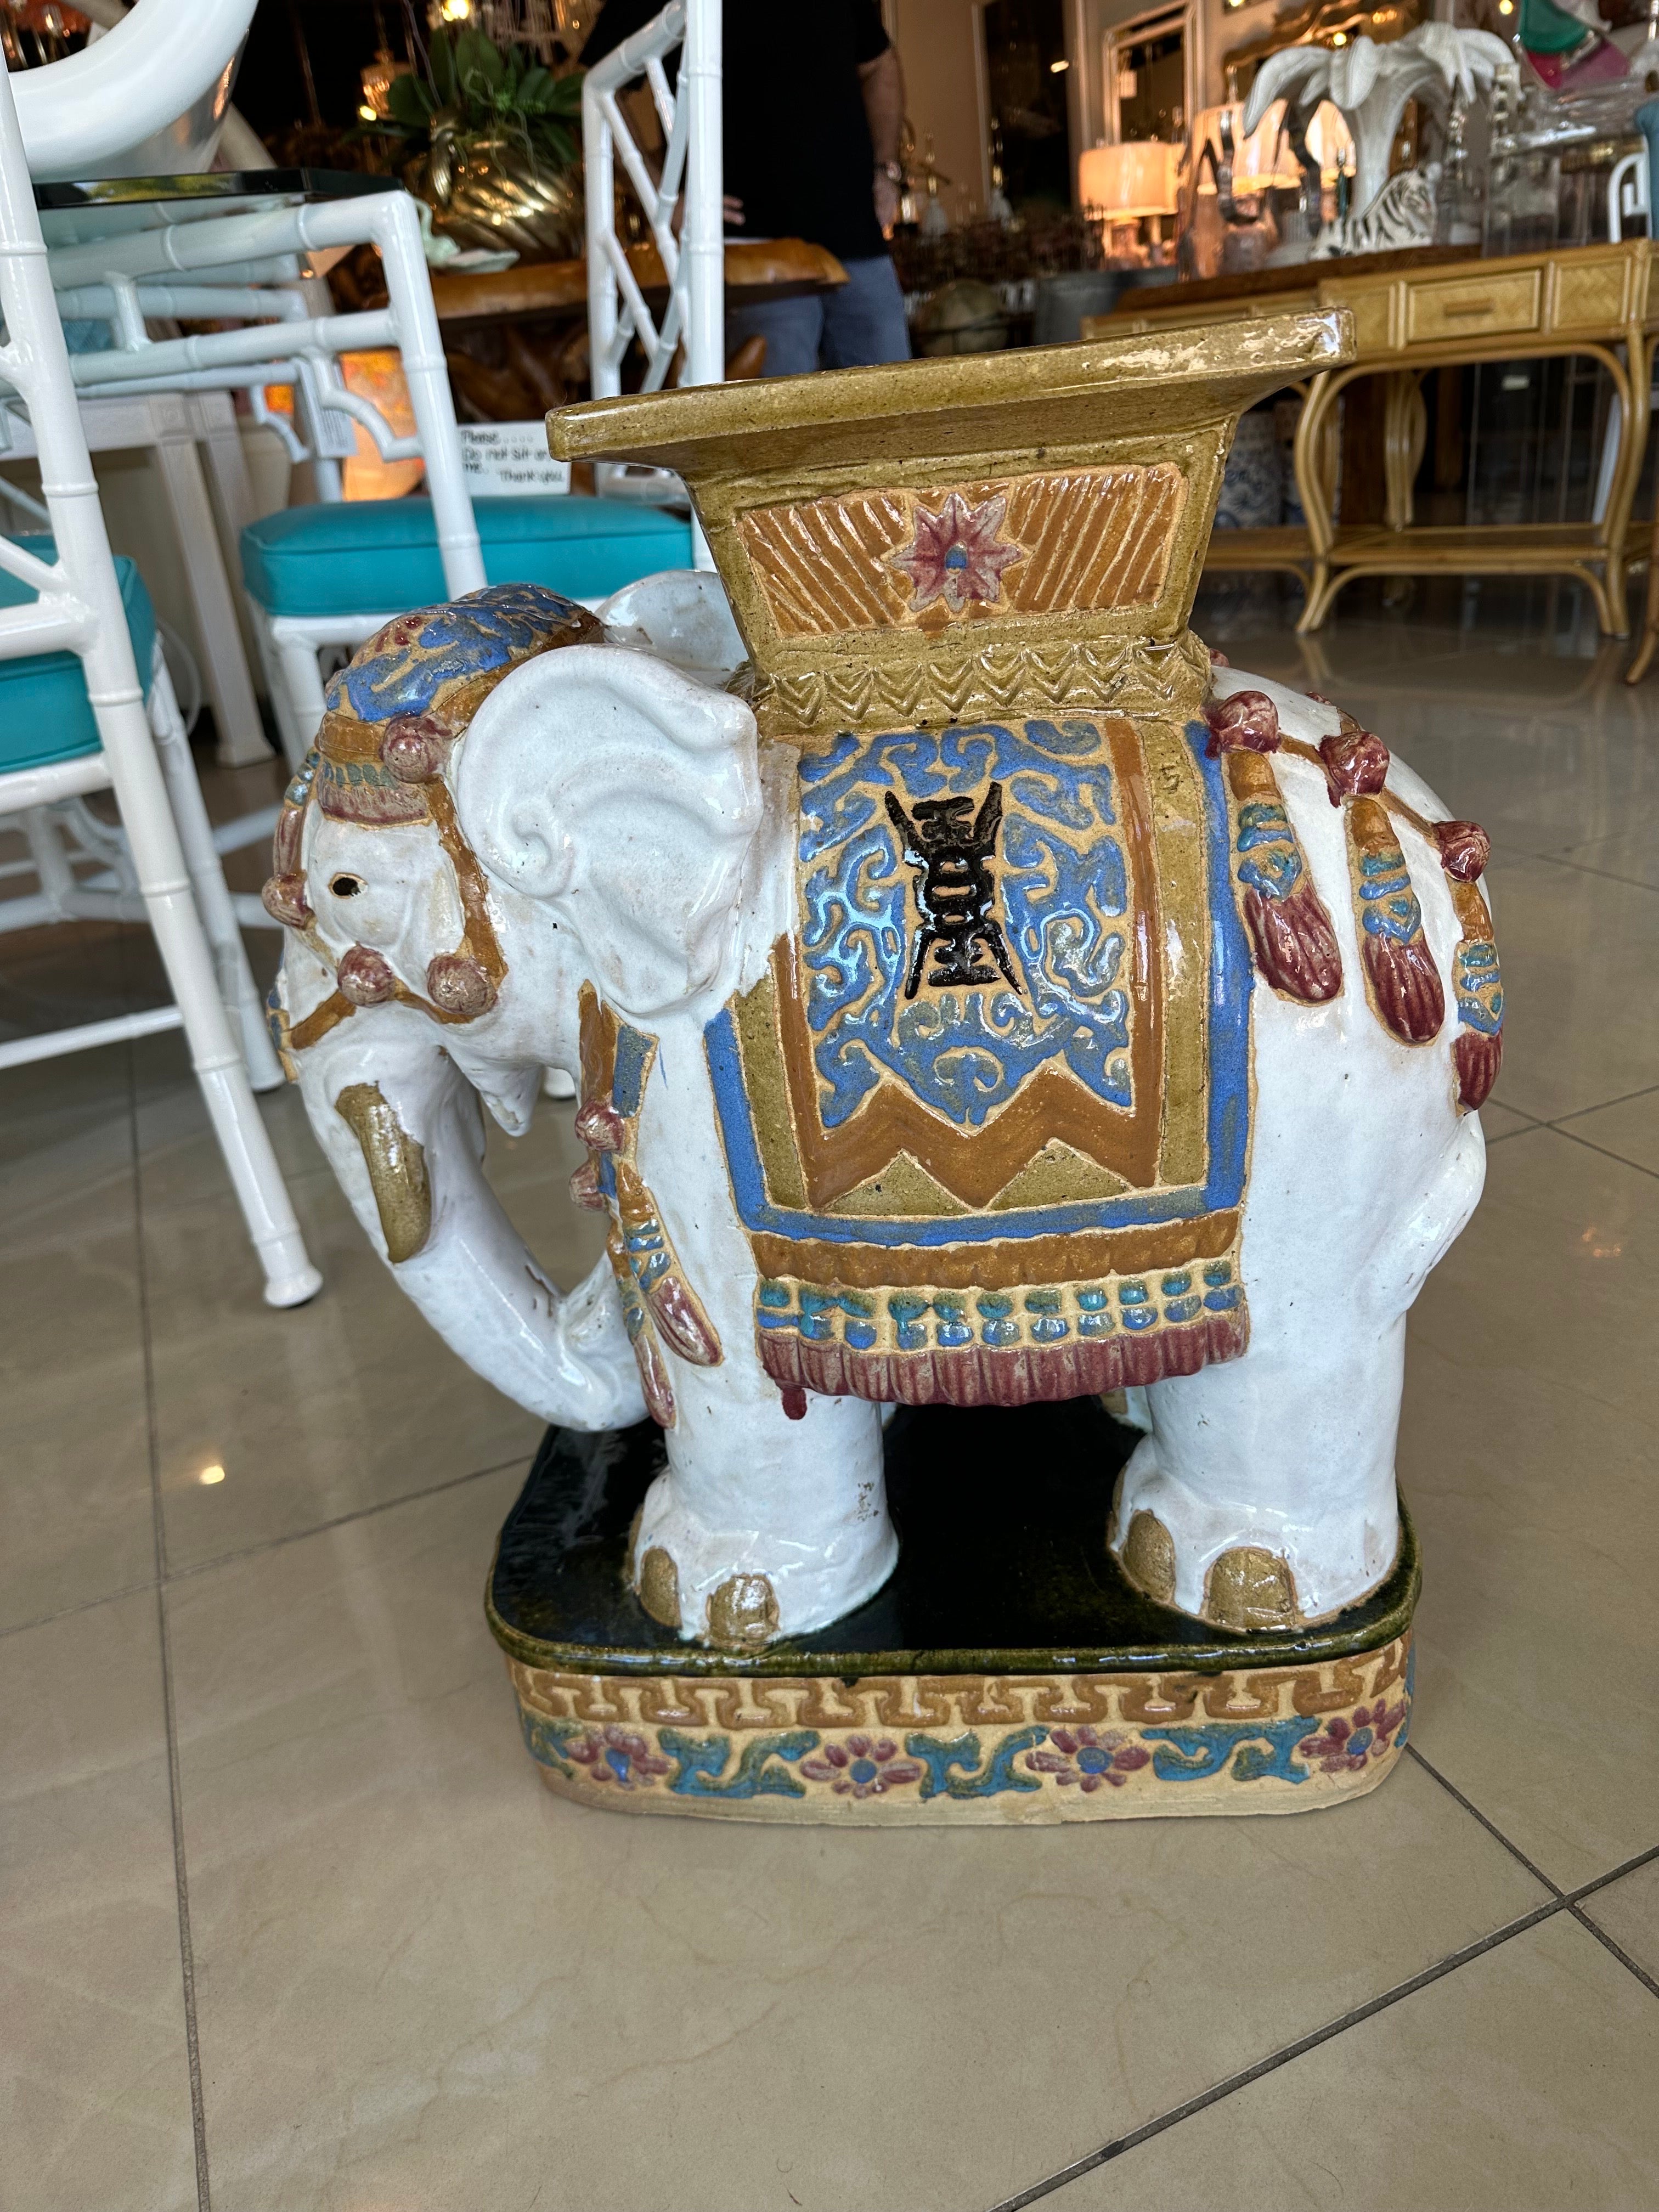 Vintage ceramic elephant garden stool stand side table. No chips or breaks. Dimensions: 22.5 H x 20 w x 10 D.